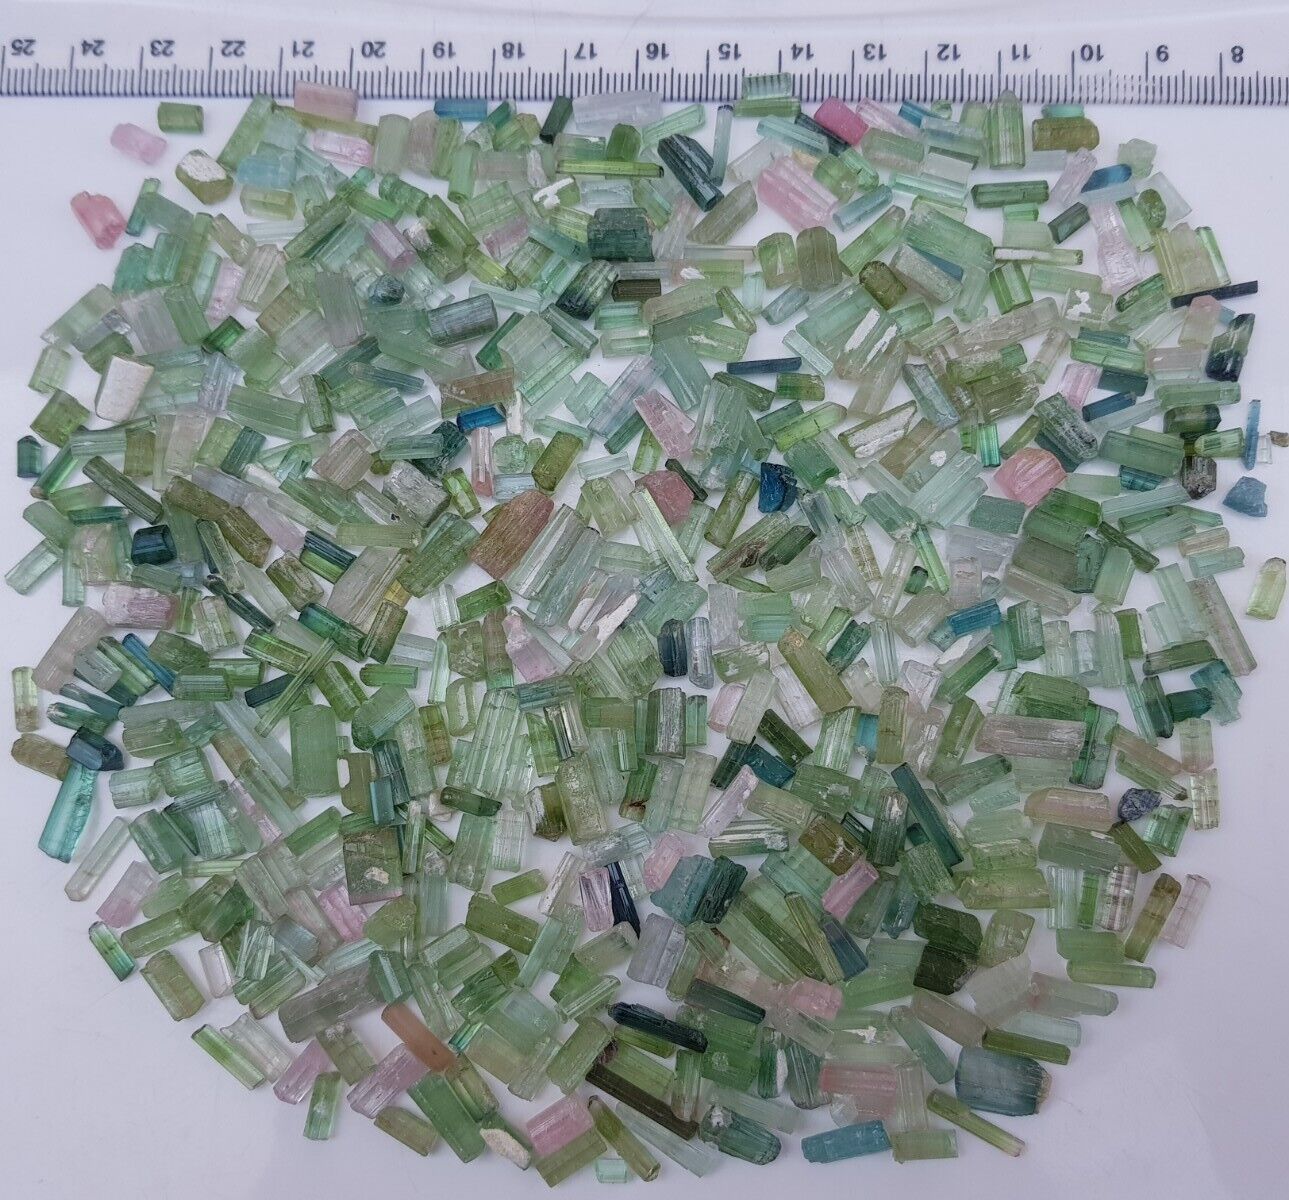 645 Carat Natural Mint Green+Mix Tourmaline Crystals from Afghanistan Wholesale